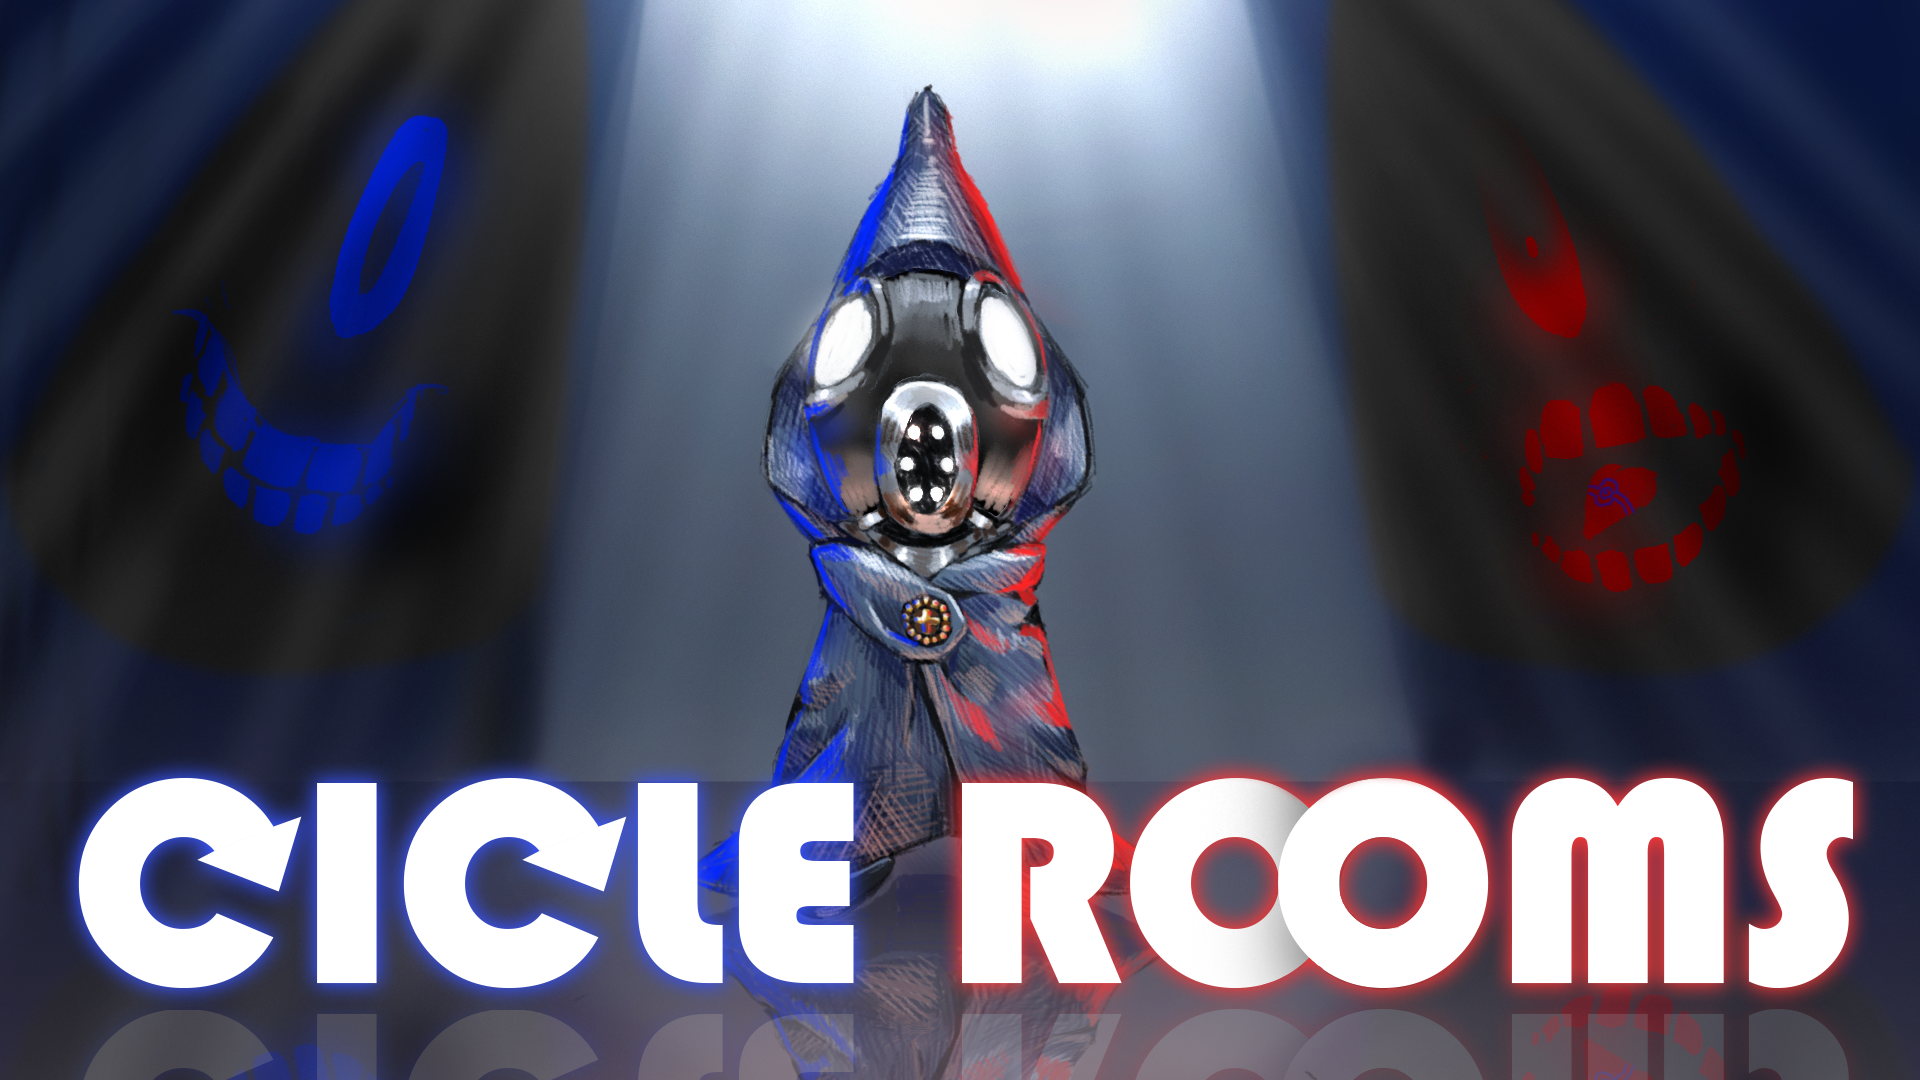 Cicle Rooms